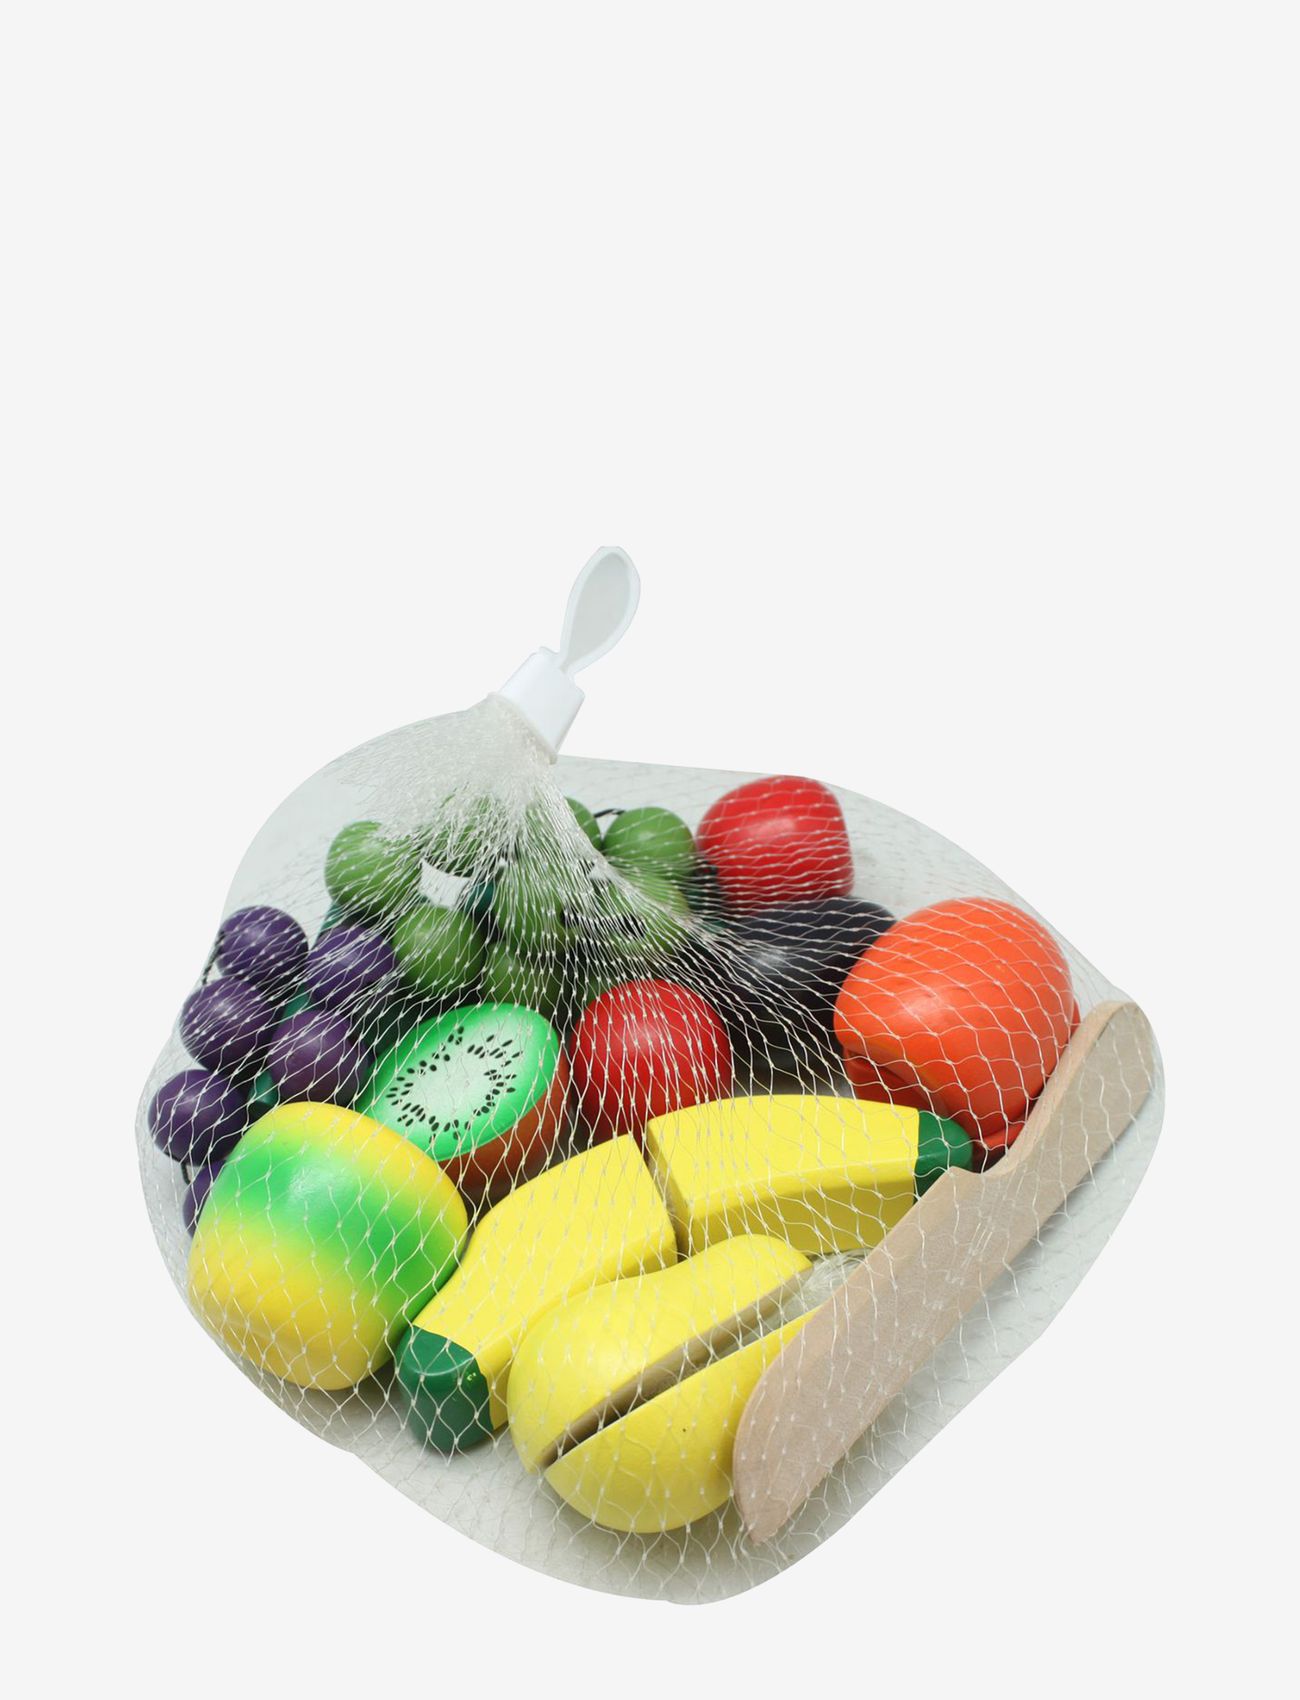 Magni Toys - Mixed fruit in net - legemad & legekager - multi coloured - 0